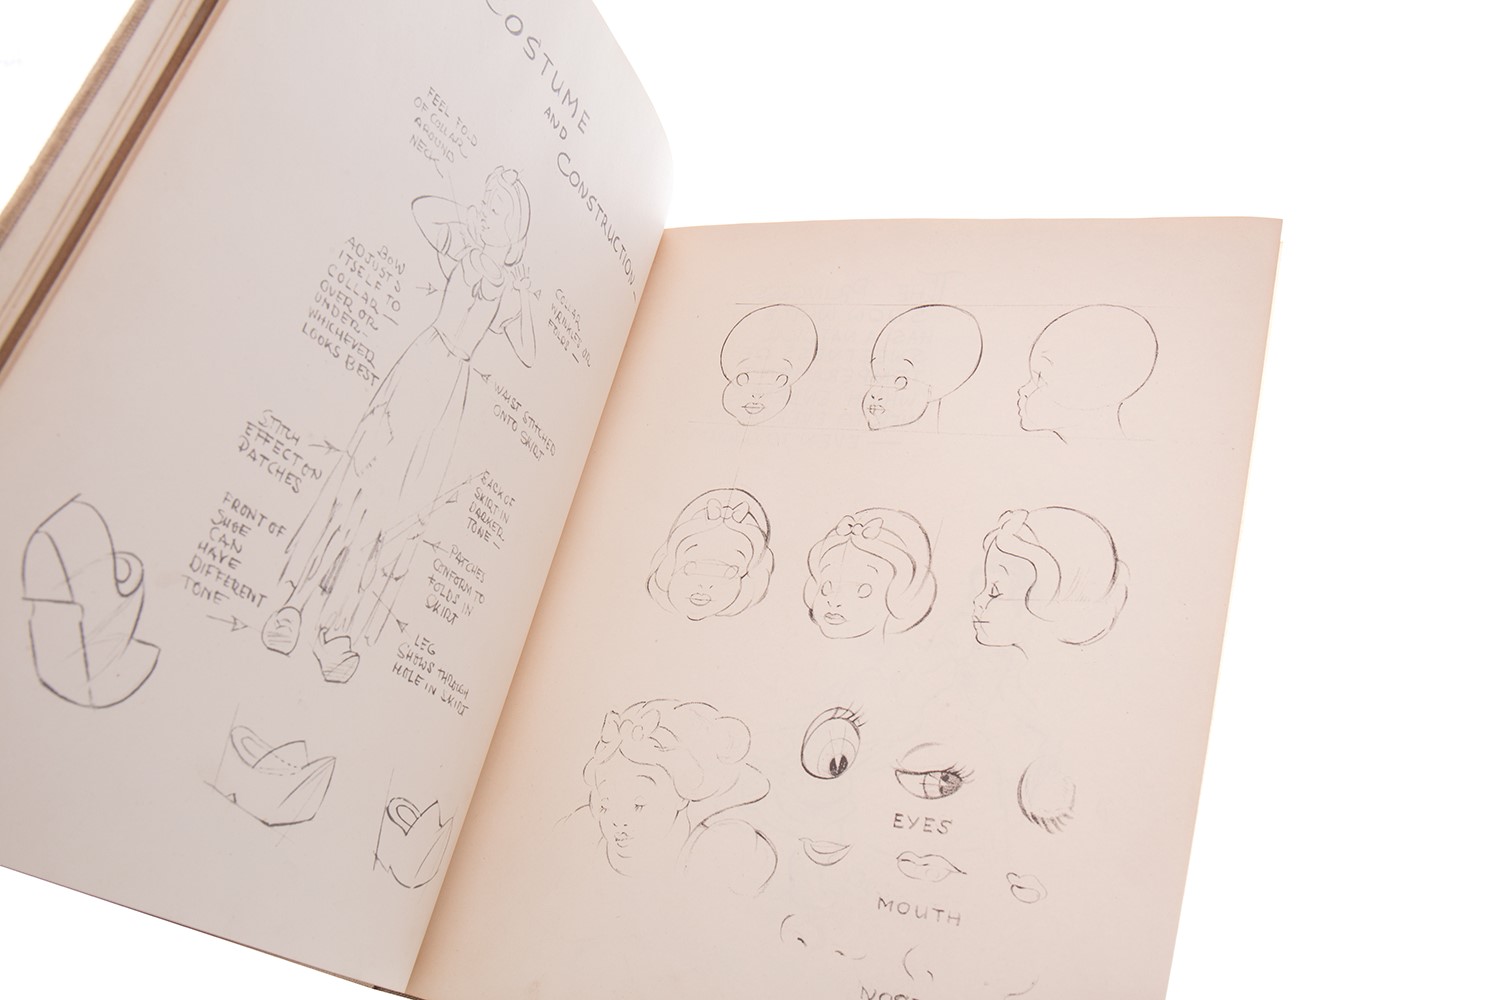 WALT DISNEY 'SKETCH BOOK' printed and bound by Wm. Collins, Sons & Co. - Image 11 of 18